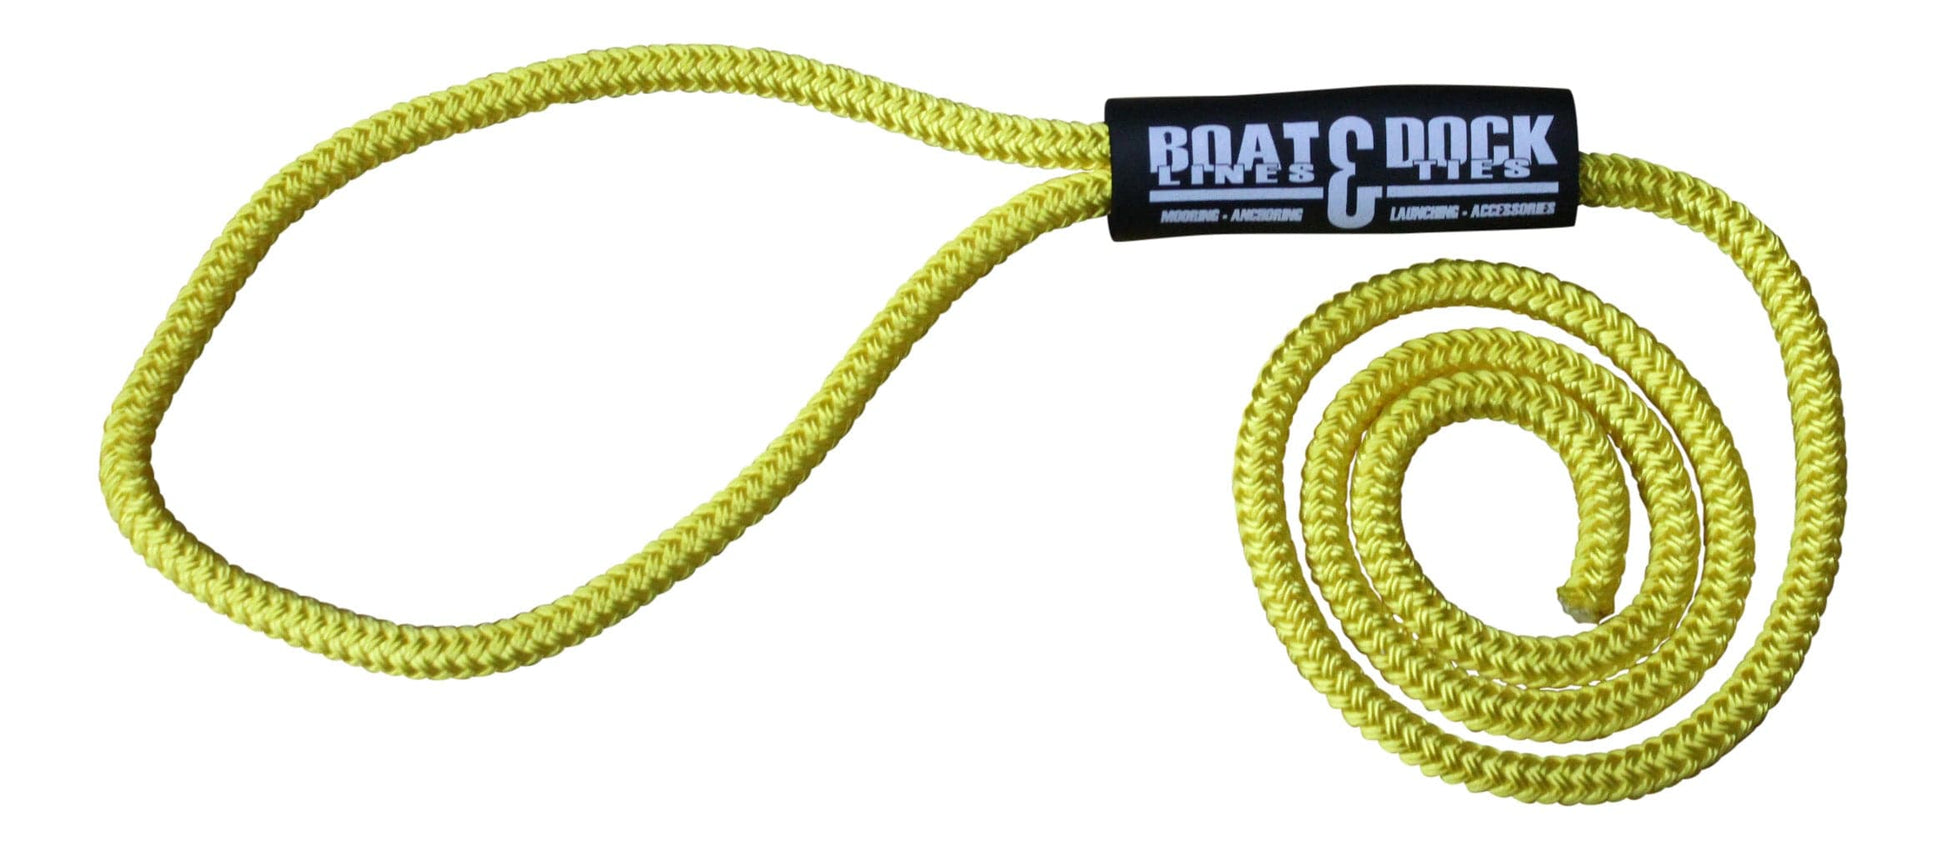 Boat Dock Fender Line - Premium Double Braided Nylon Rope, Made in USA- 2 pack - Boat Lines & Dock Ties Boat Lines & Dock Ties 4 Feet / Yellow